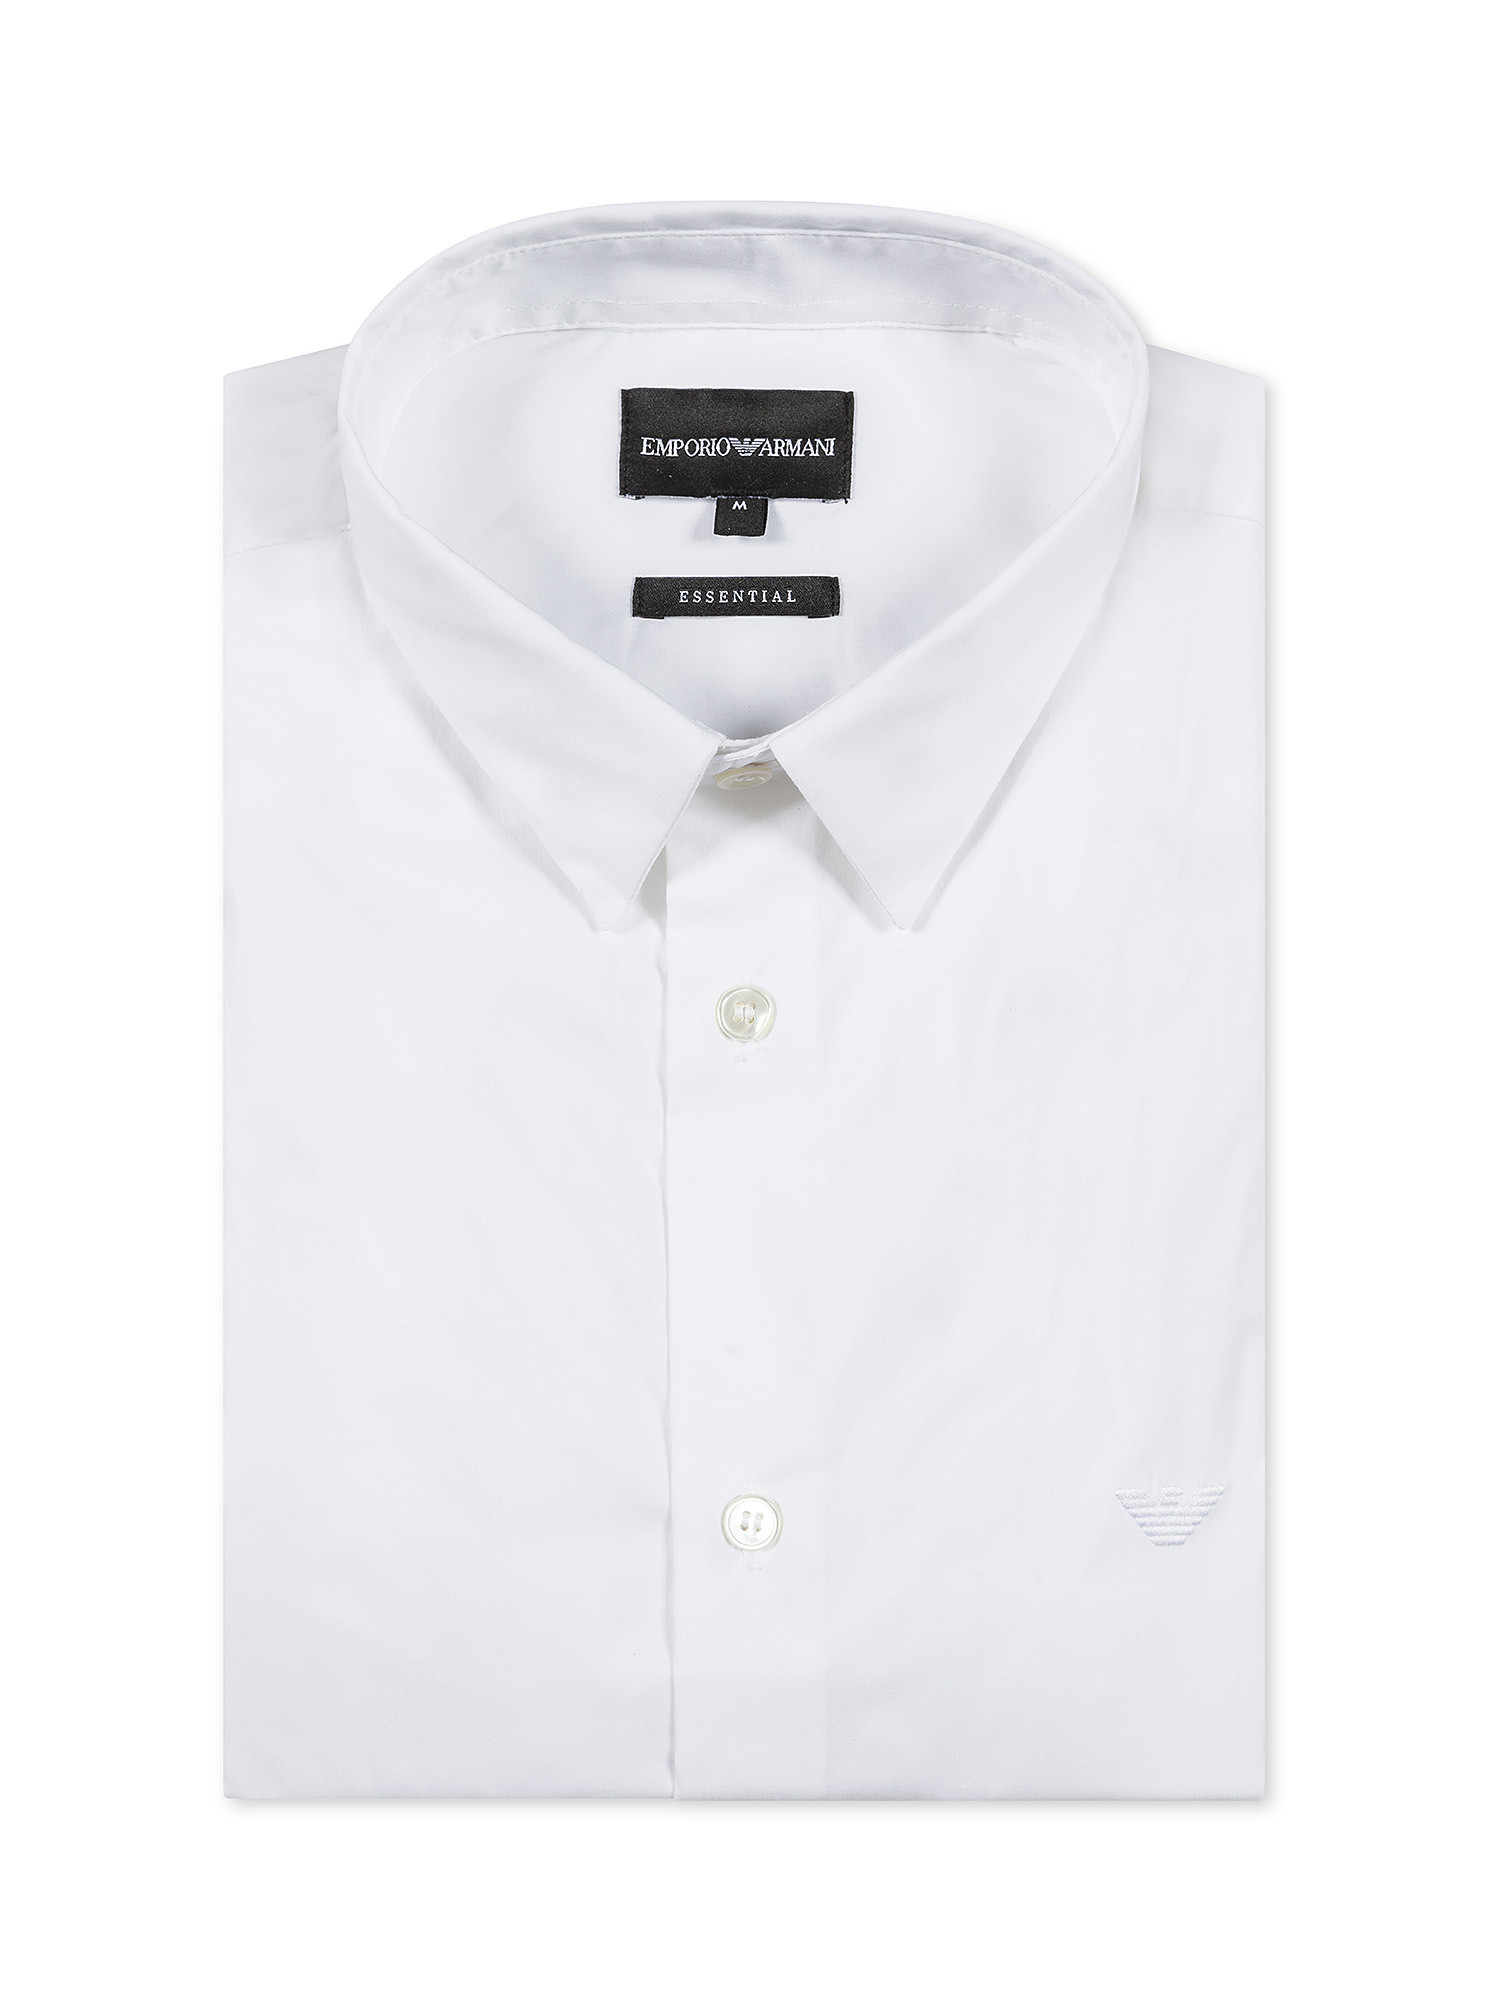 Emporio Armani - Shirt with embroidered logo, White, large image number 0